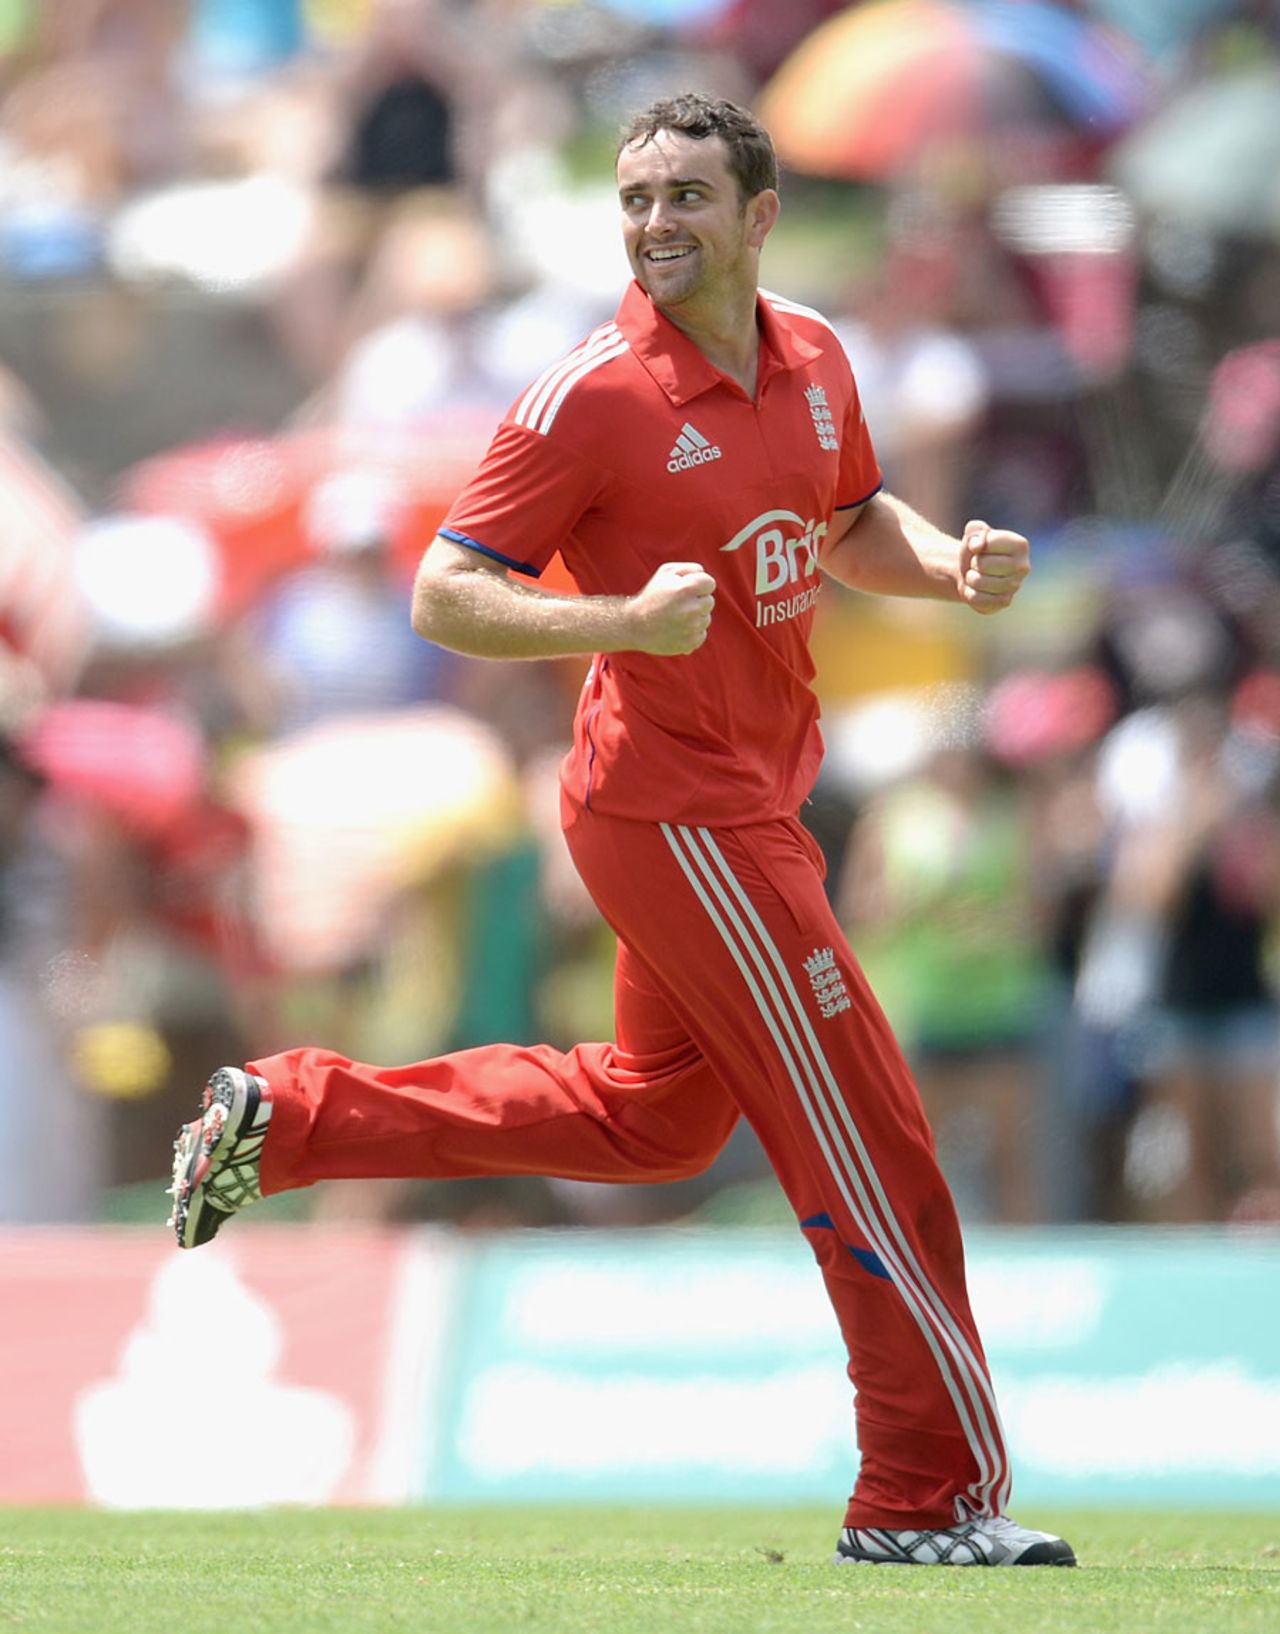 Stephen Parry claimed three wickets on his debut, West Indies v England, 2nd ODI, North Sound, March 2, 2014